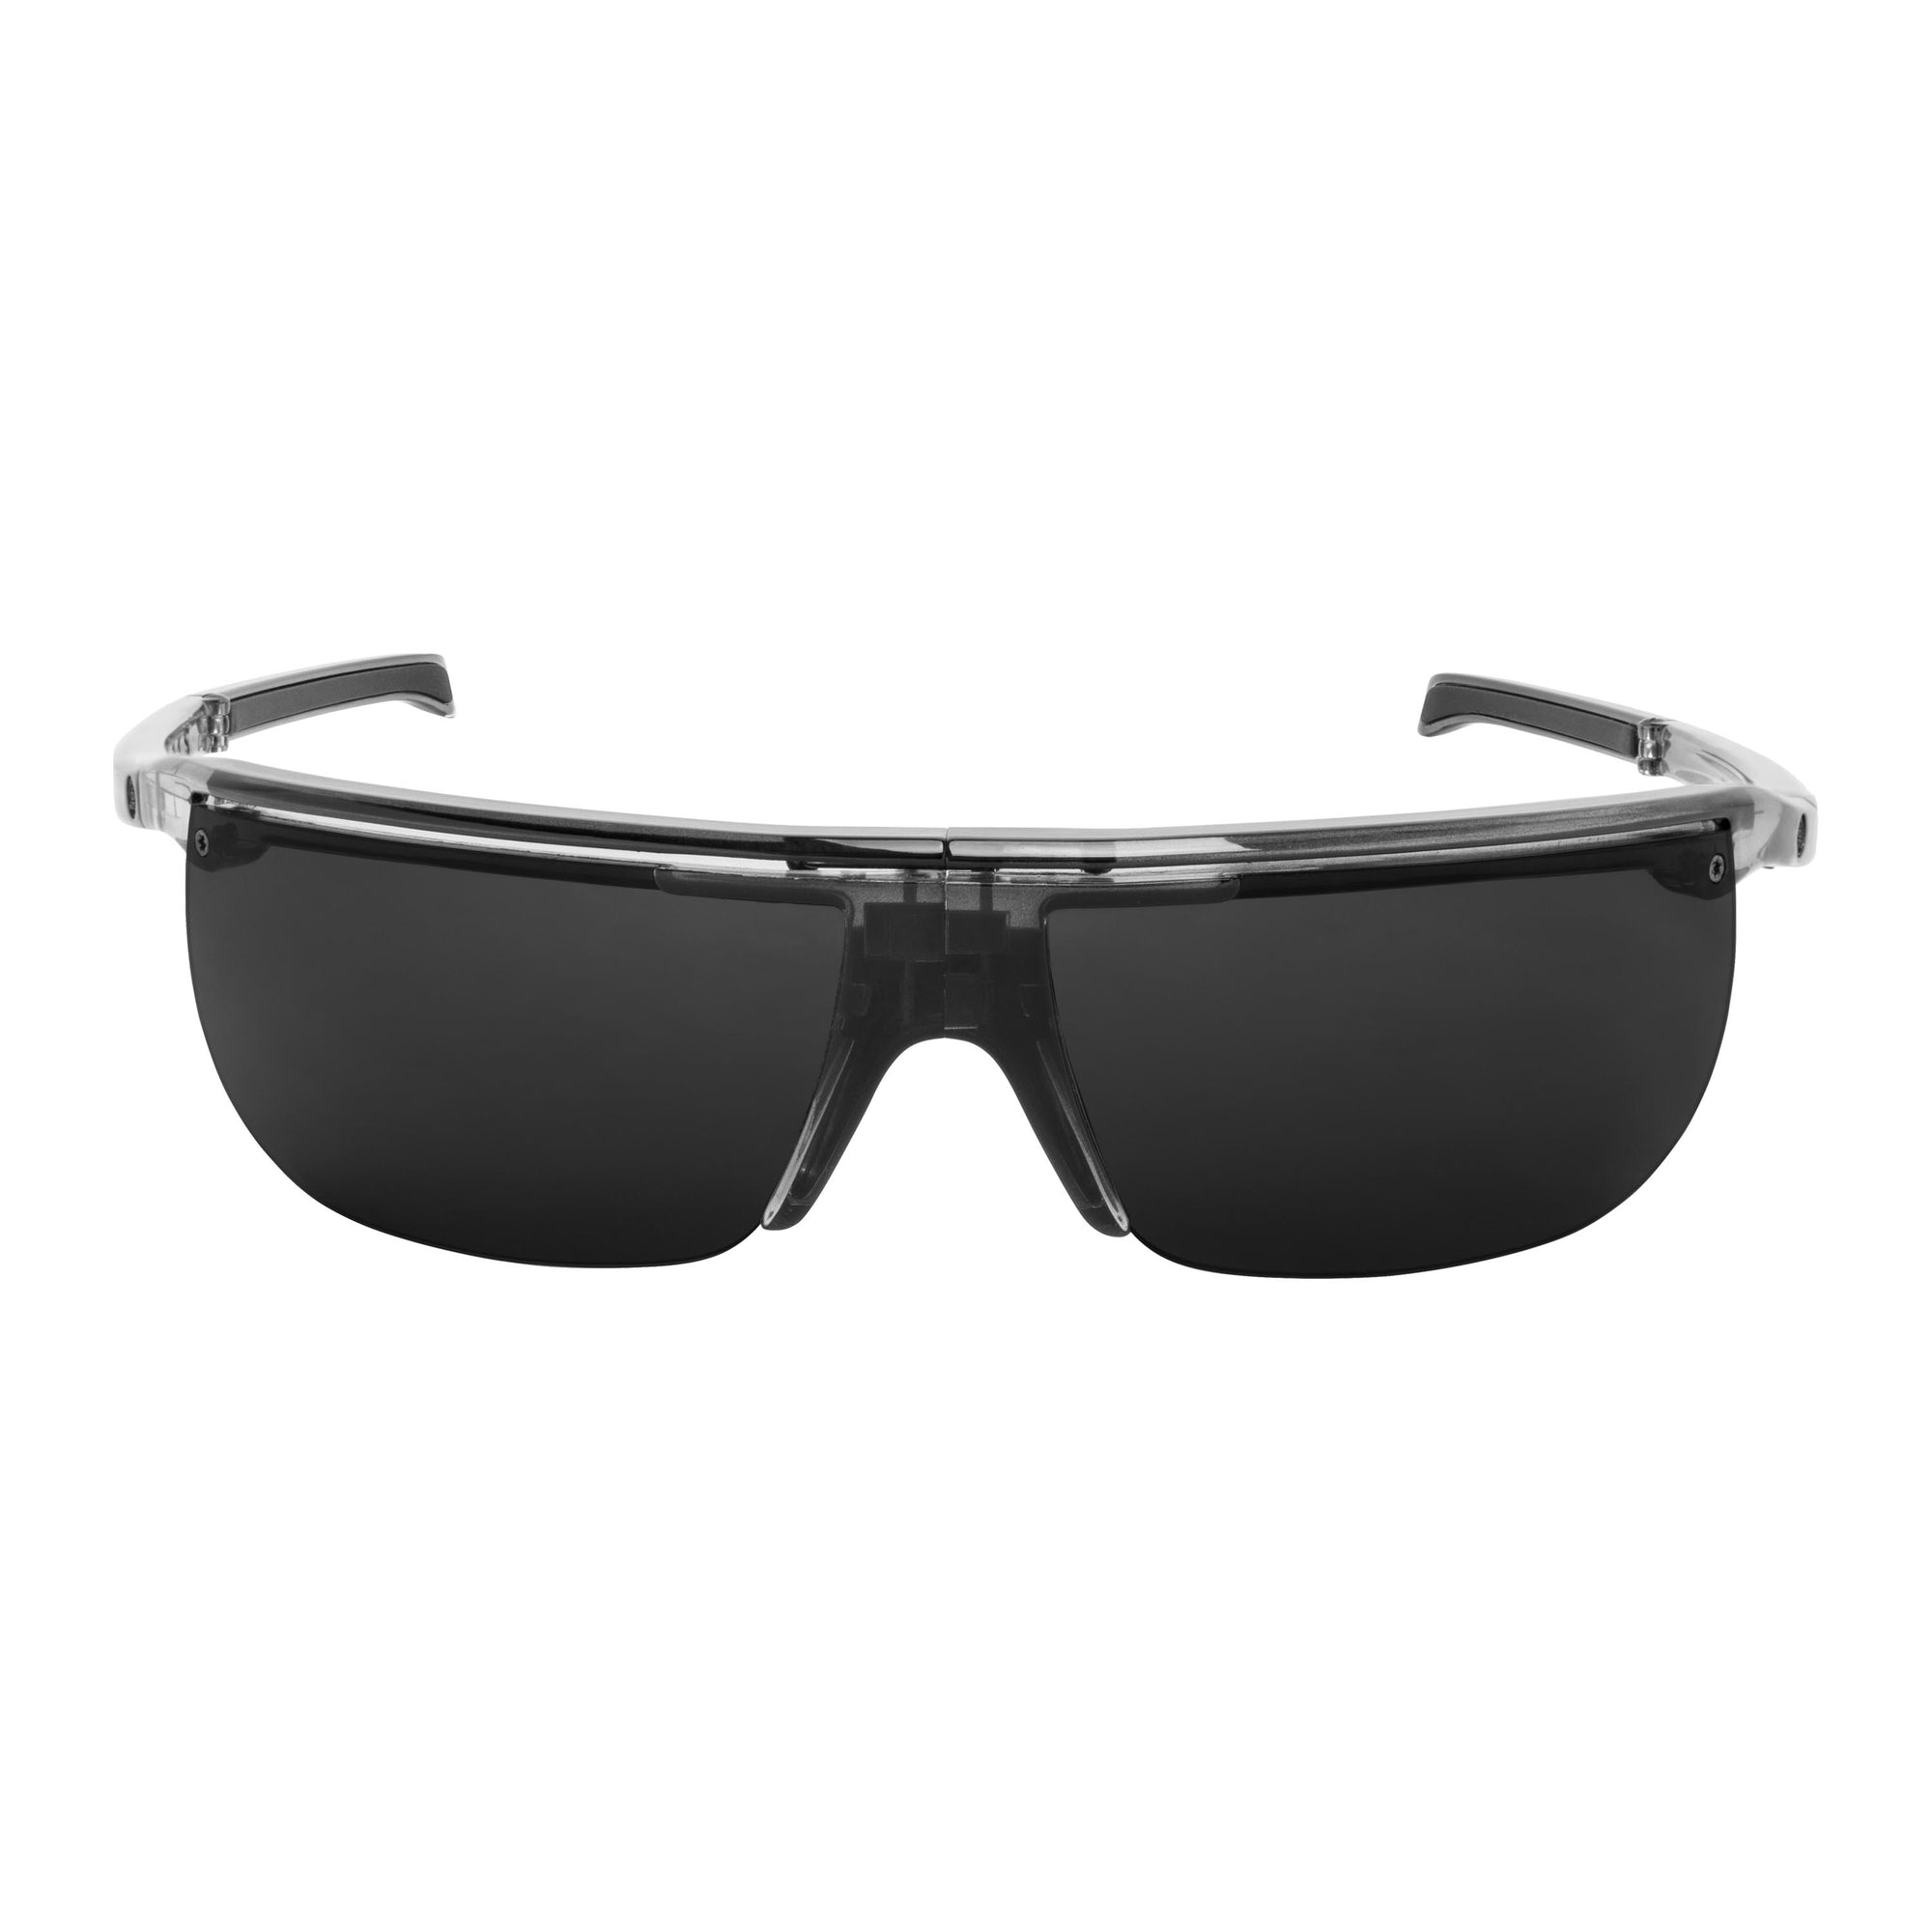 Popticals, Premium Compact Sunglasses, PopArt, 030030-SFGP, Polarized Sunglasses, Gloss Smoke/Clear Crystal, Gray Lenses, Glam View